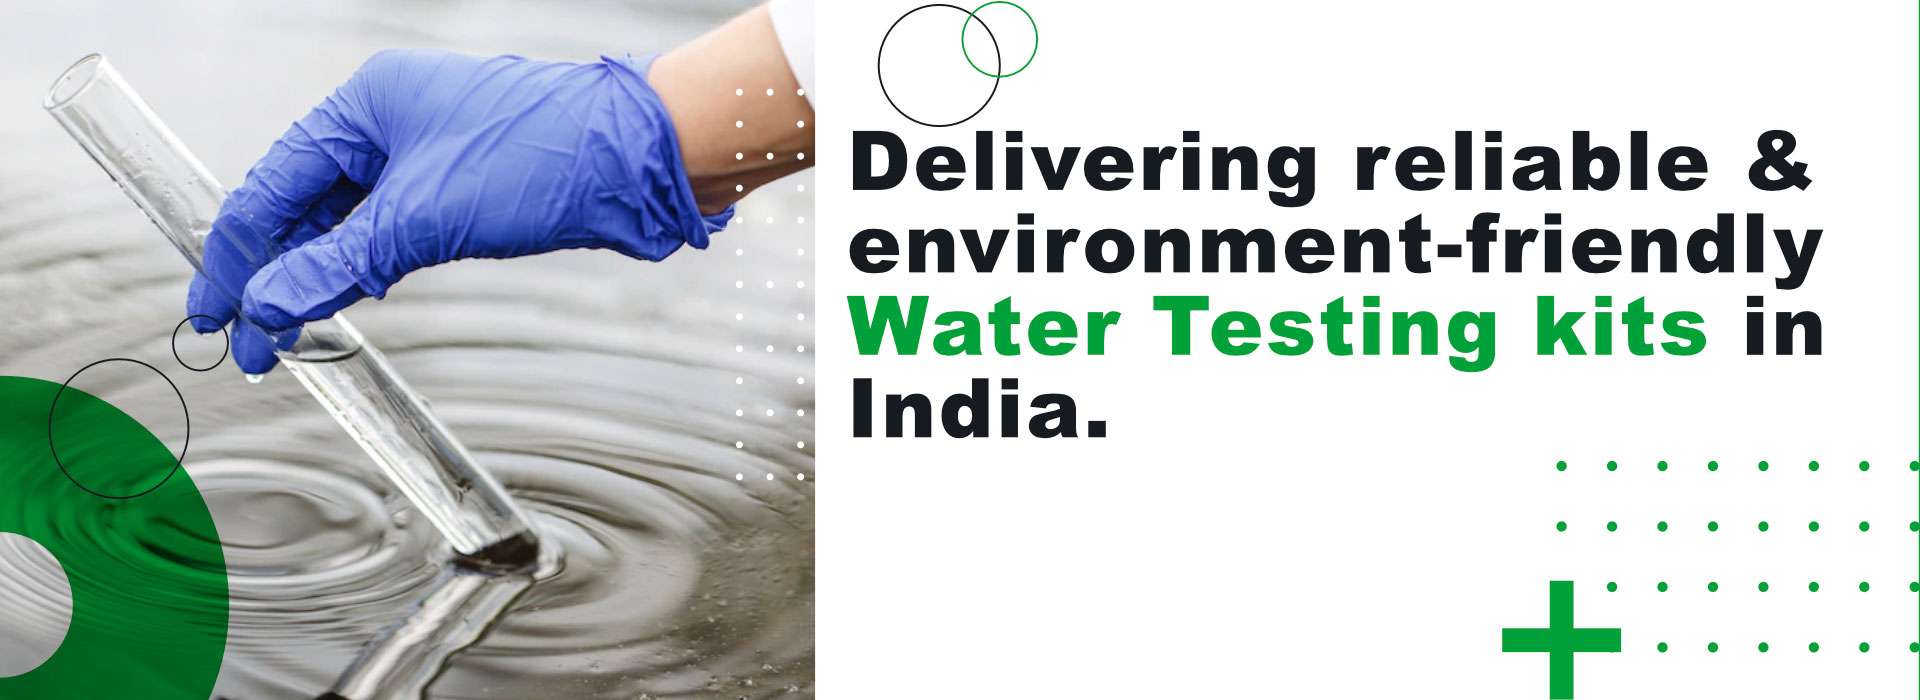  Delivering reliable & environment-friendly water Testing kits in India Manufacturers in Varanasi